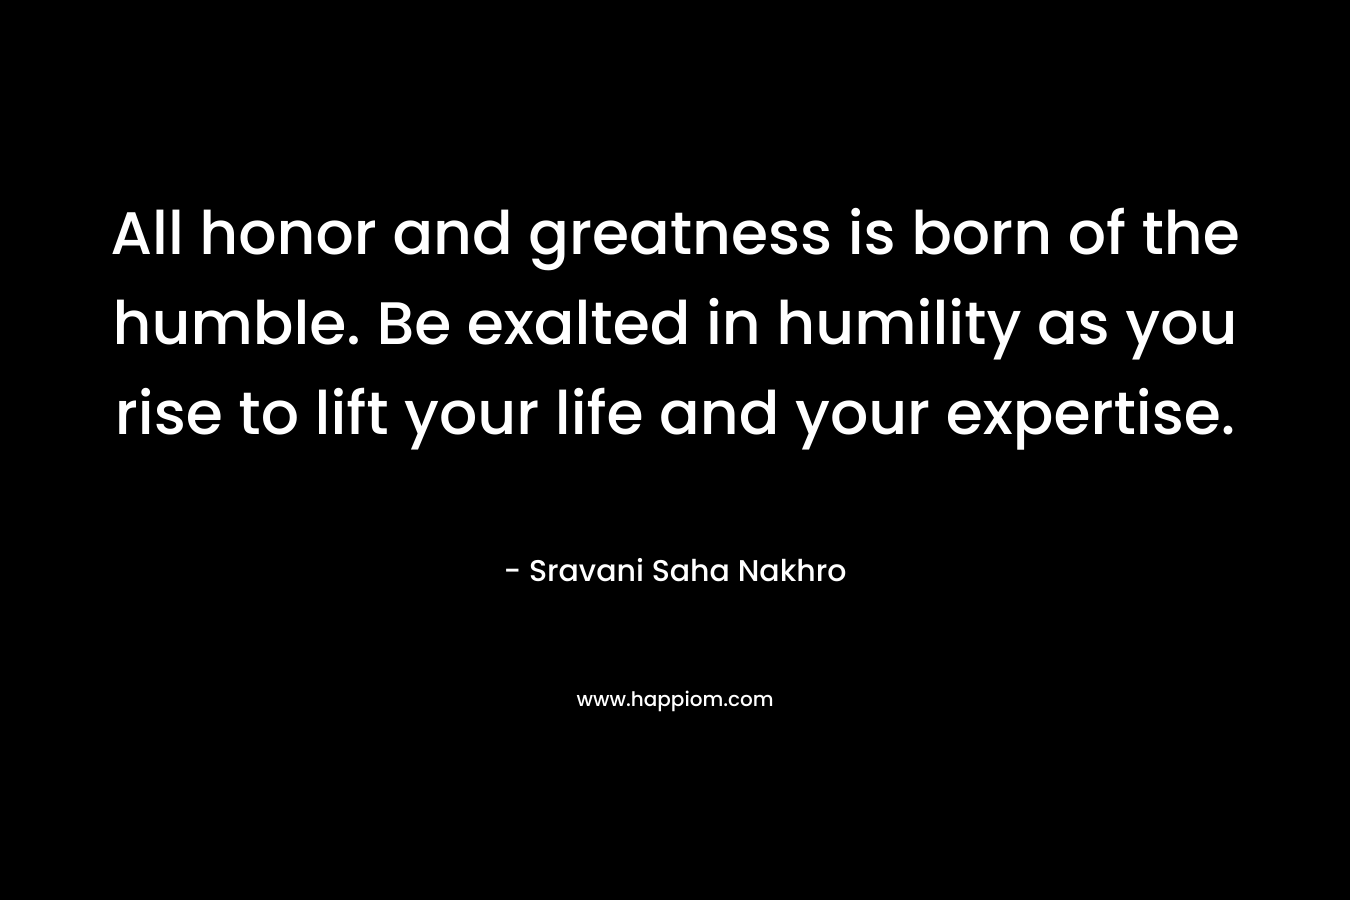 All honor and greatness is born of the humble. Be exalted in humility as you rise to lift your life and your expertise. – Sravani Saha Nakhro